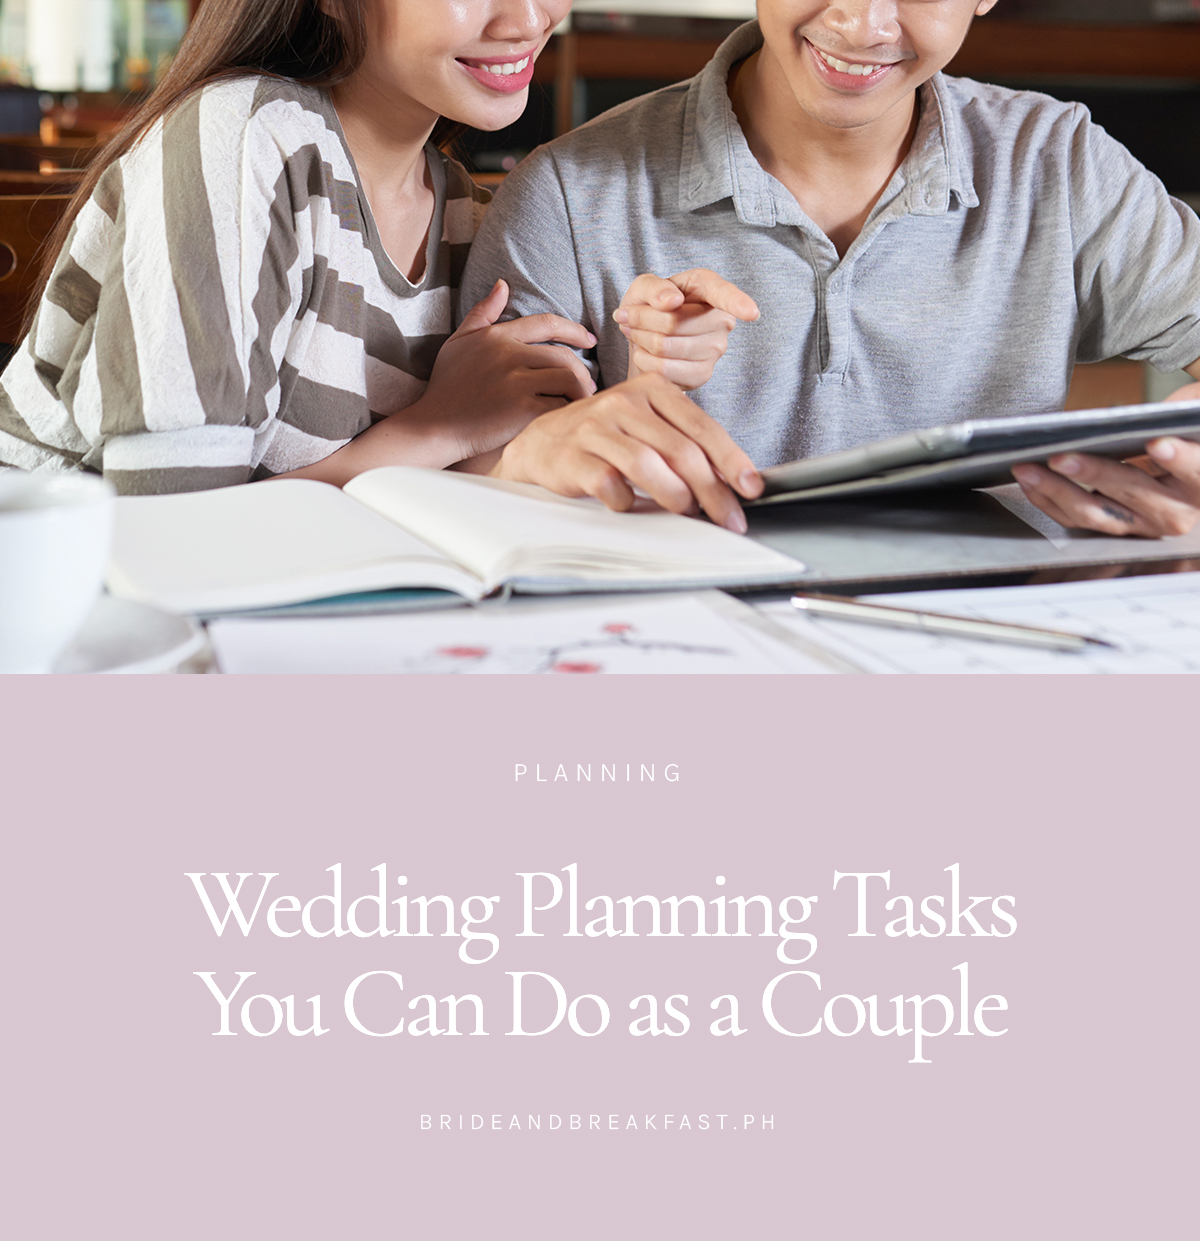 Wedding Planning Tasks You Can Do as a Couple